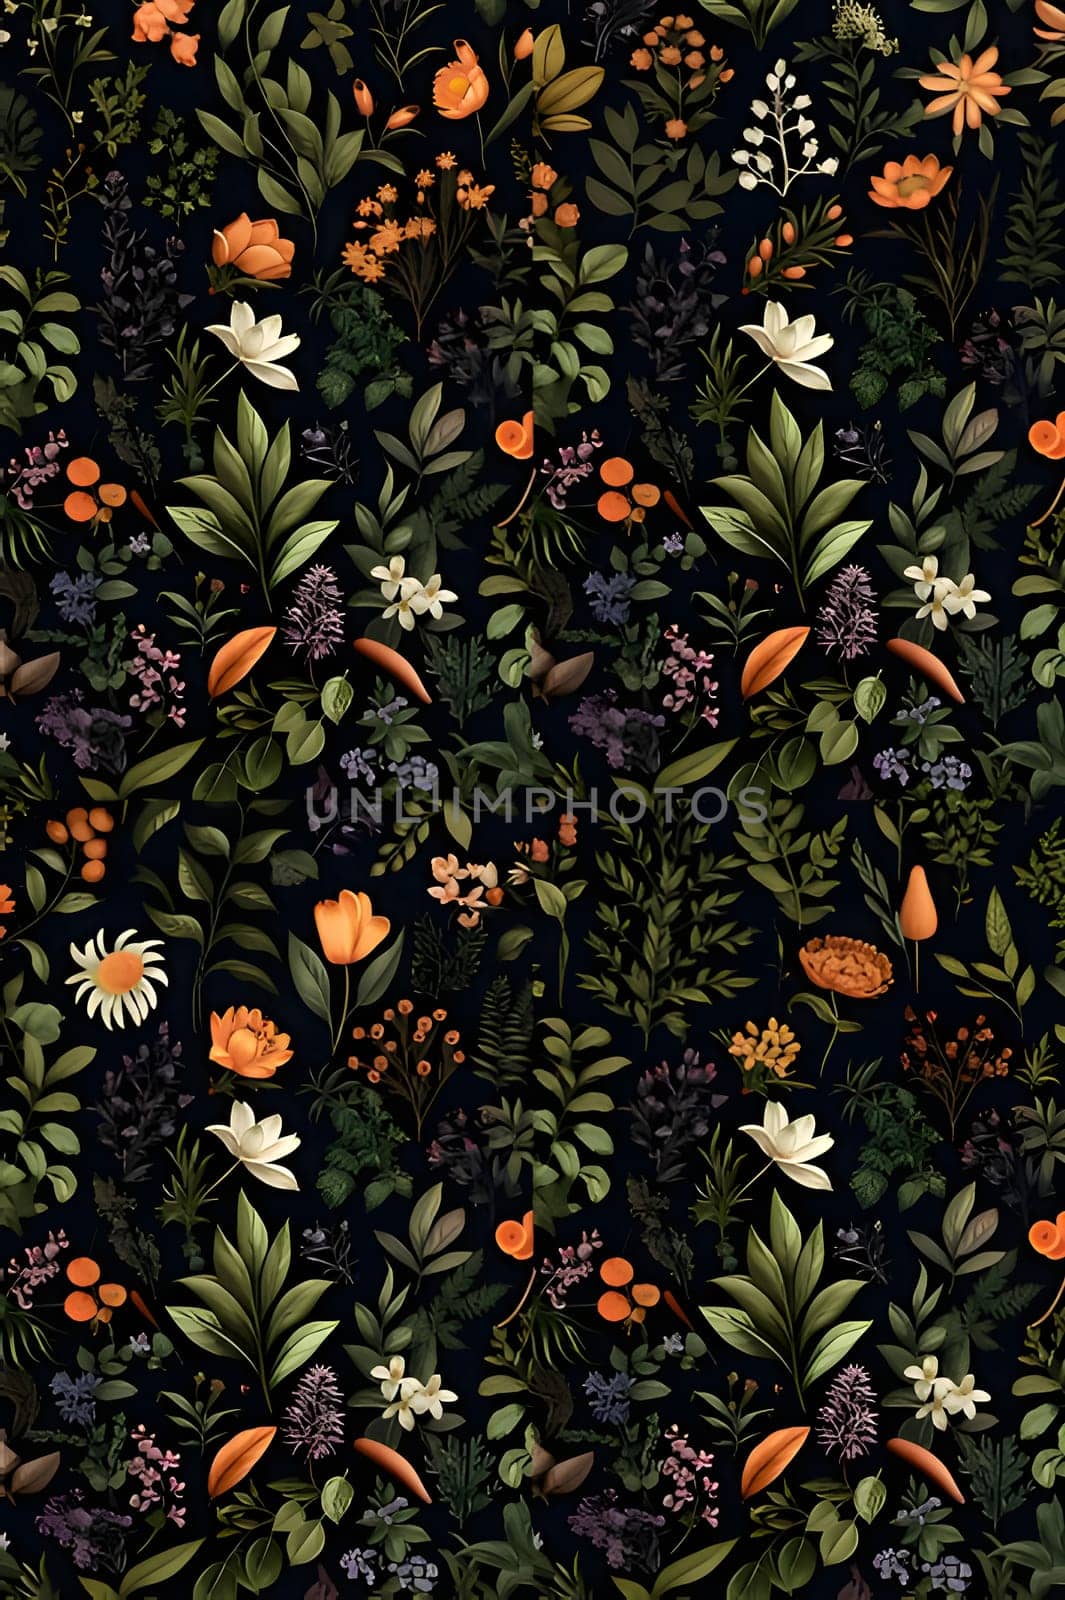 Patterns and banners backgrounds: Seamless pattern with flowers, leaves and berries. Vector illustration.